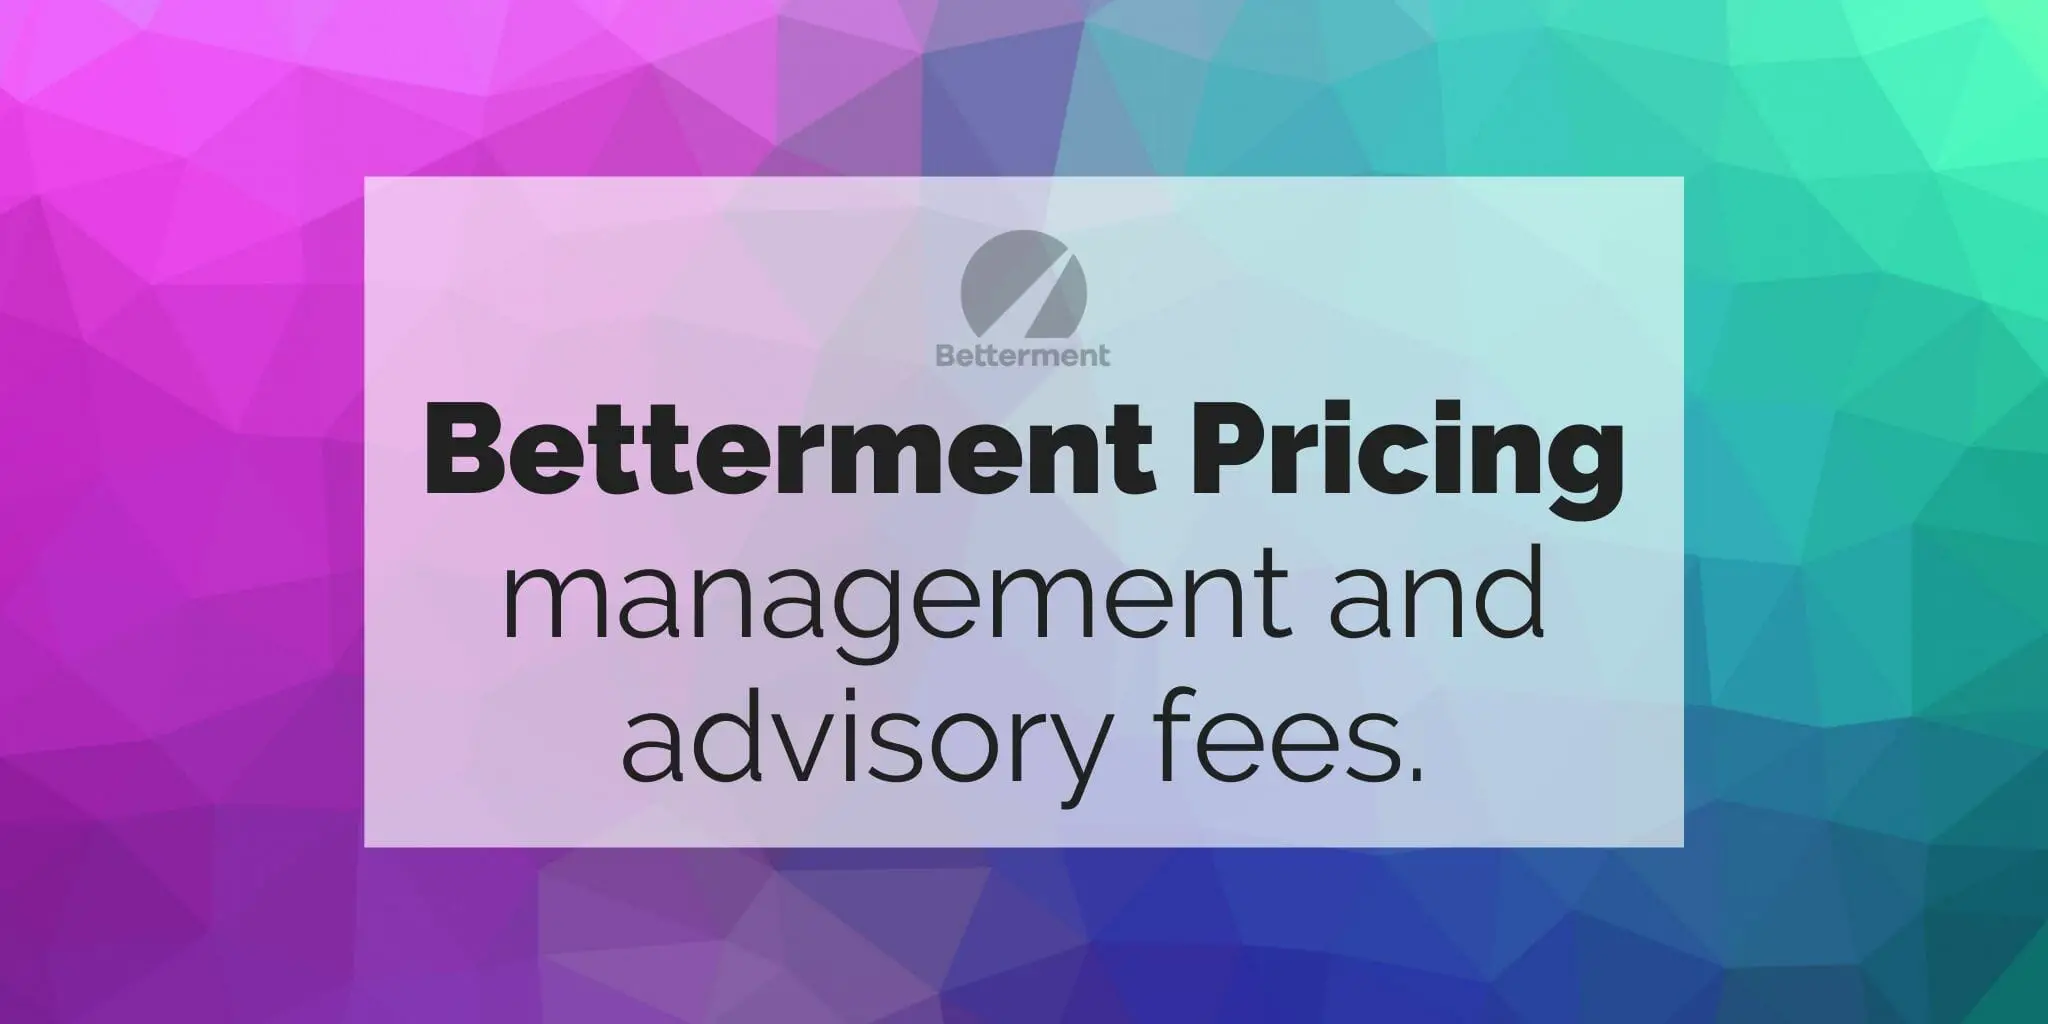 Geometric gradient background with text "Betterment Pricing management and advisory fees" super-imposed over it.